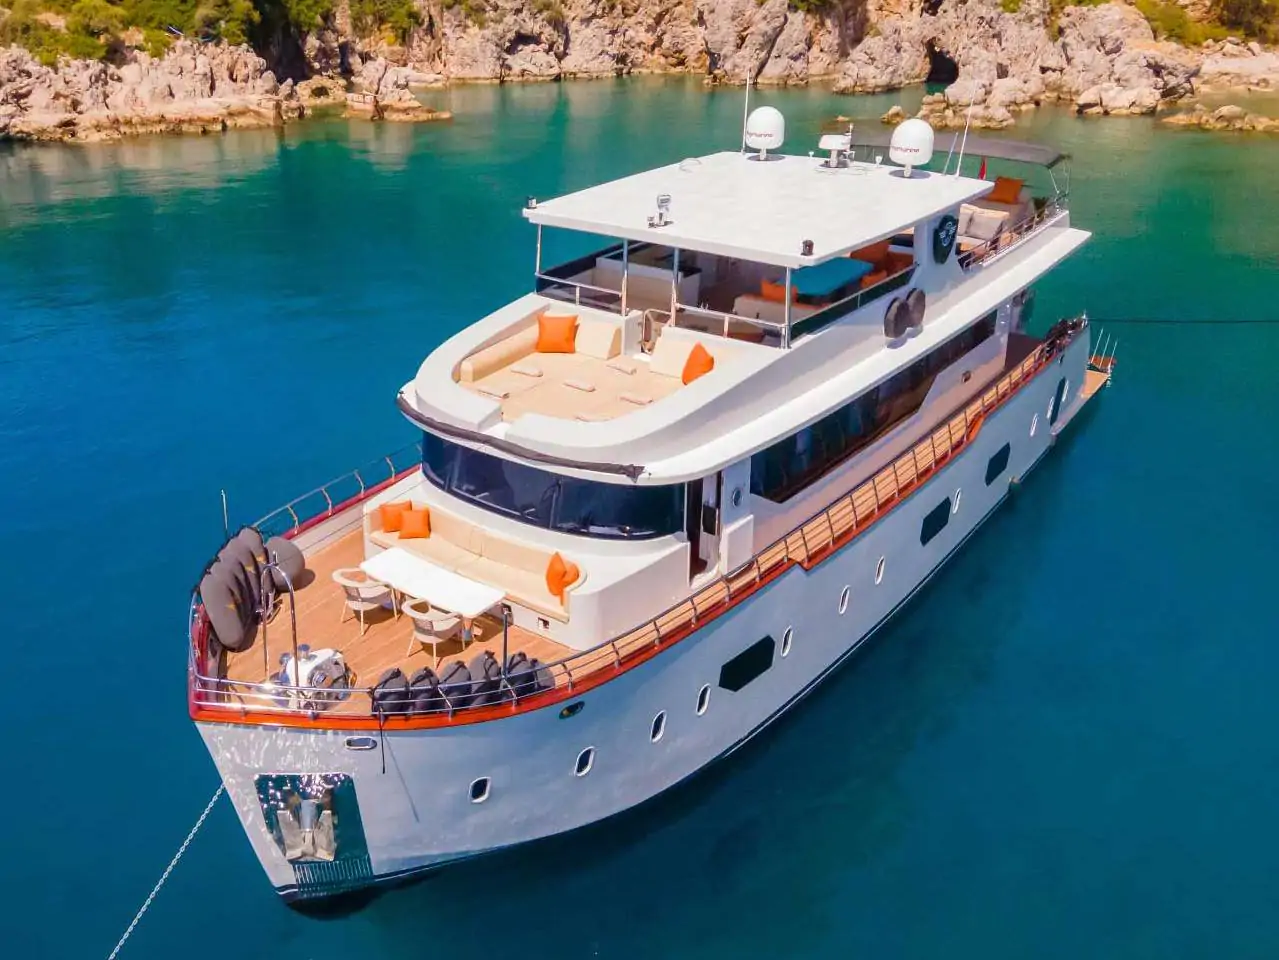 Luxurious Trawler Yacht For Privet Charters in Fethiye, Turkey